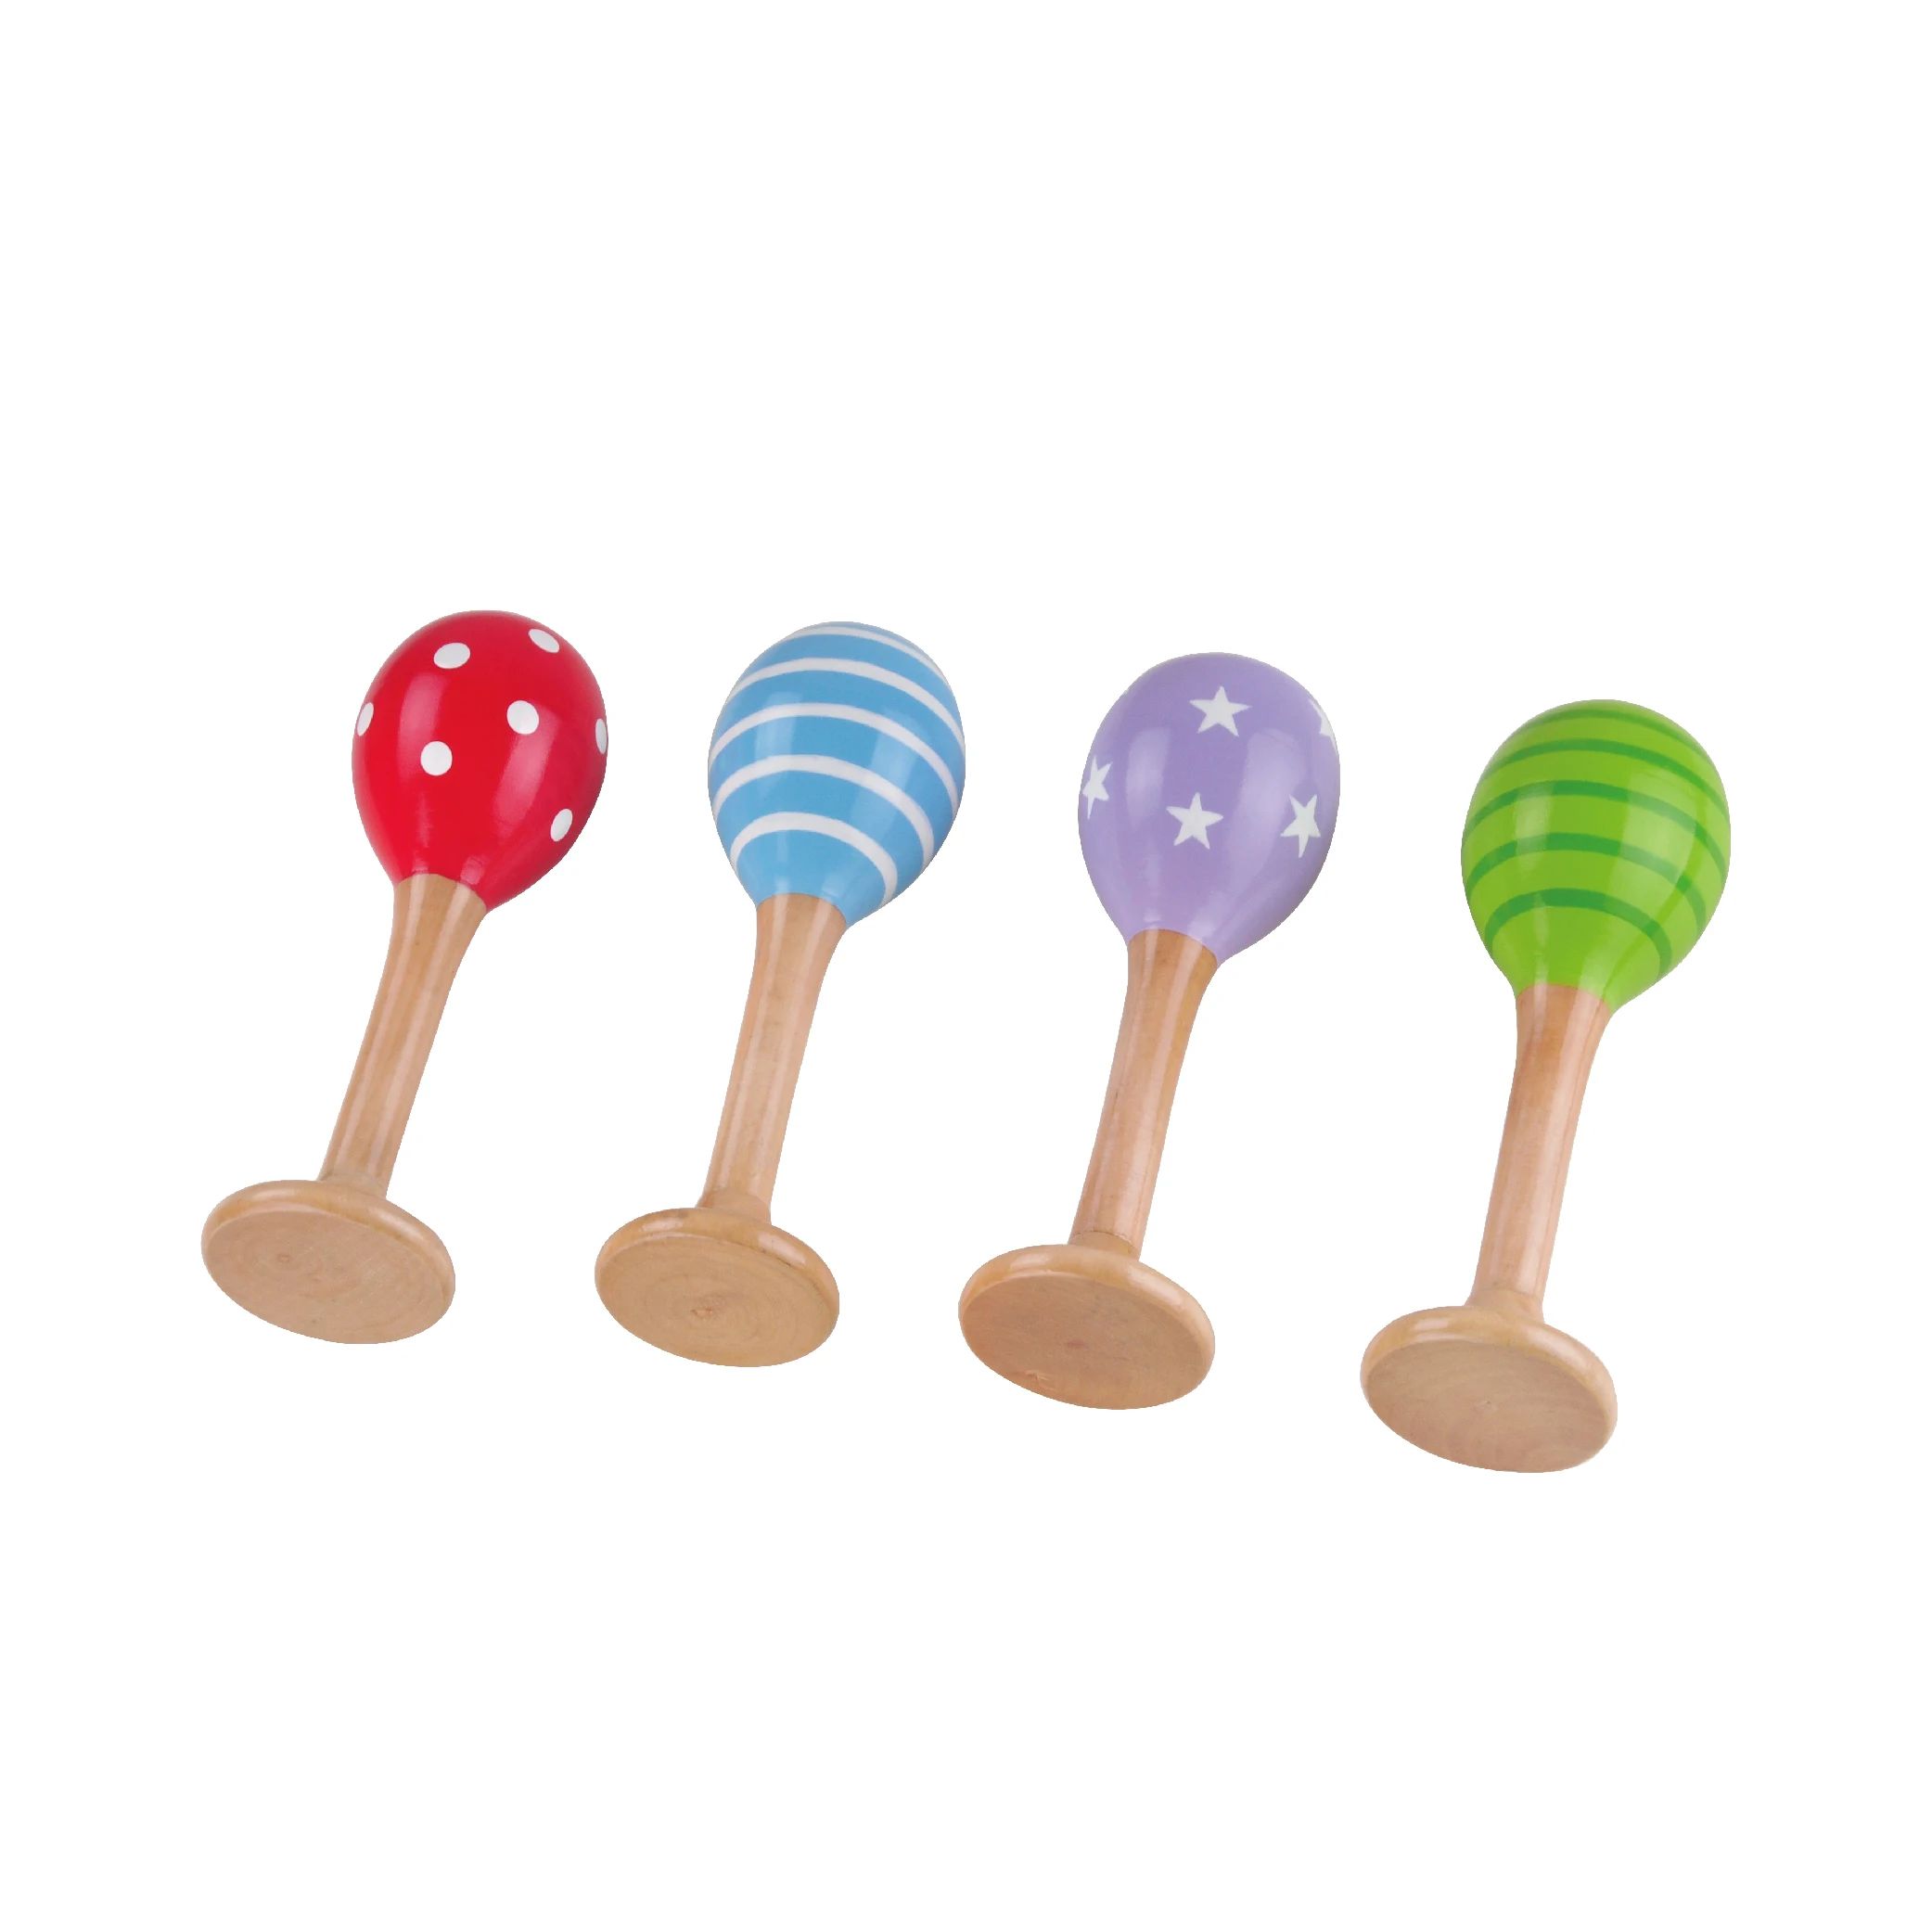 Children colorful musical instruments mini music maraca toy wooden maracas for kids